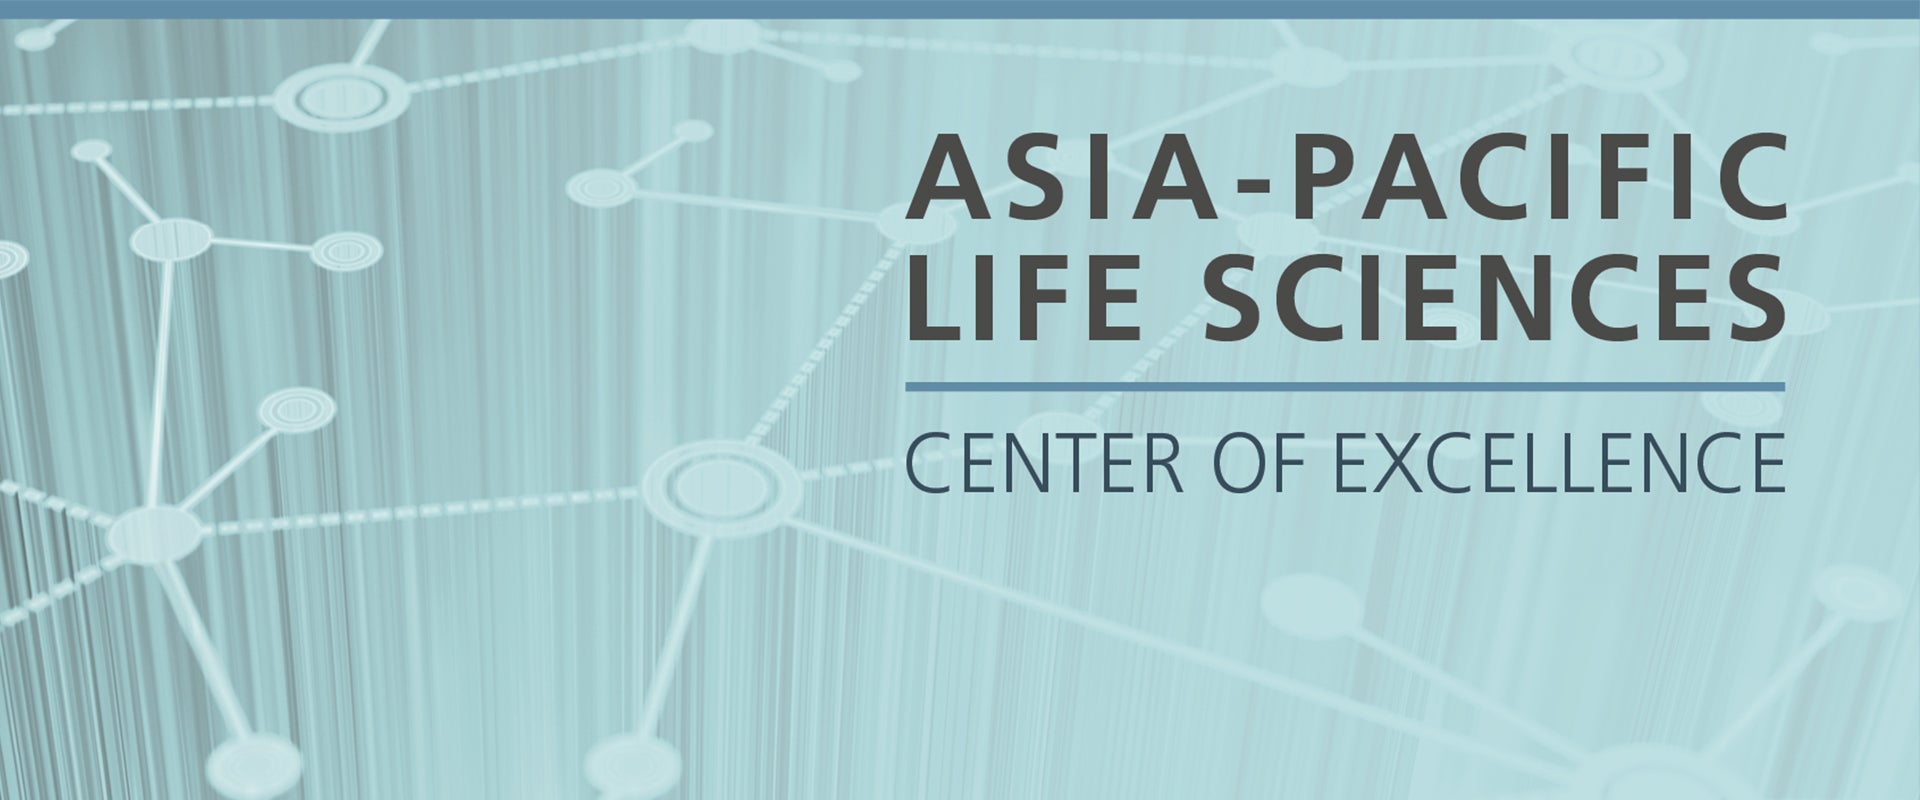 Asia-Pac Life Sciences Centre of Excellence